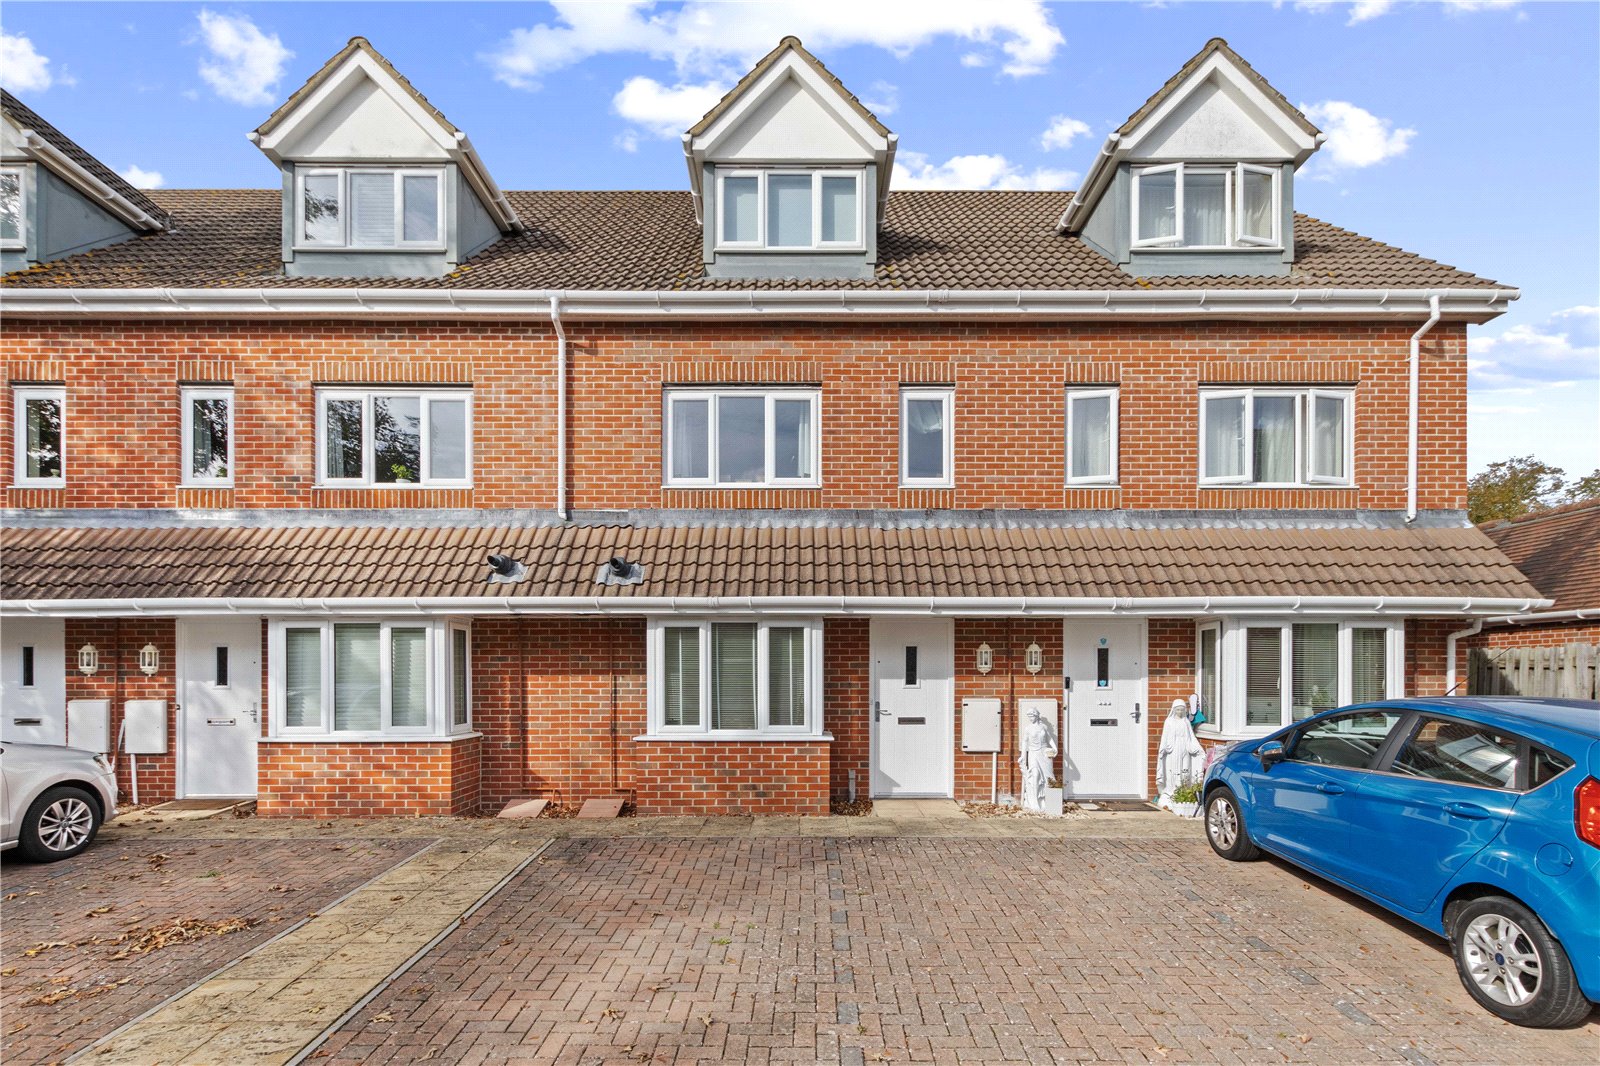 1 bed apartment for sale in Graylingwell Drive, Chichester - Property Image 1